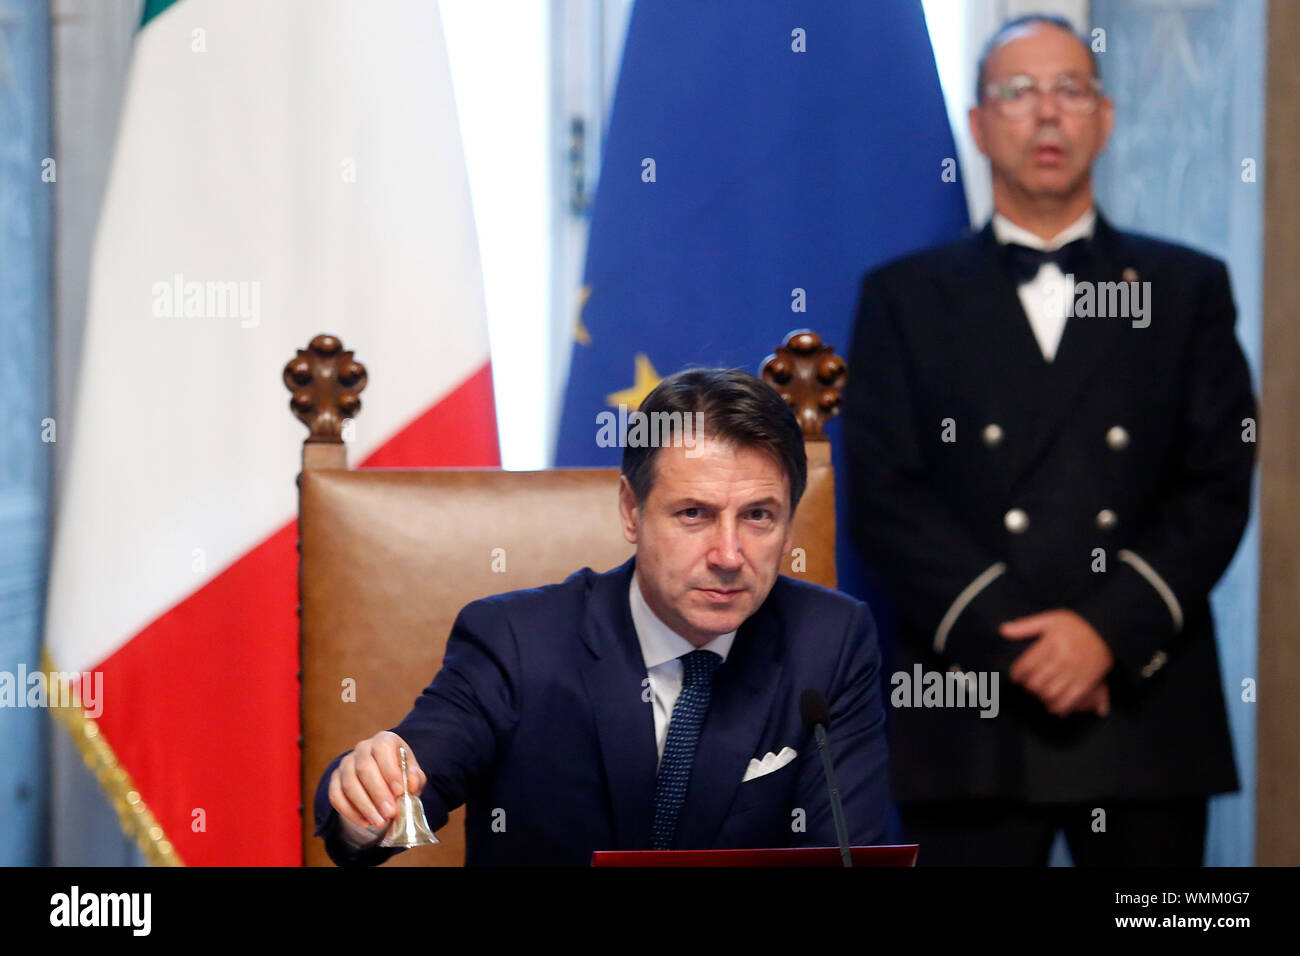 Rome, Italy. 05th Sep, 2019. Giuseppe Conte starts the first Minister's cabinet ringing the bell Rome September 5th 2019. Palazzo Chigi. Ceremony of the bell for the new appointed premier. Foto Samantha Zucchi Insidefoto Credit: insidefoto srl/Alamy Live News Stock Photo